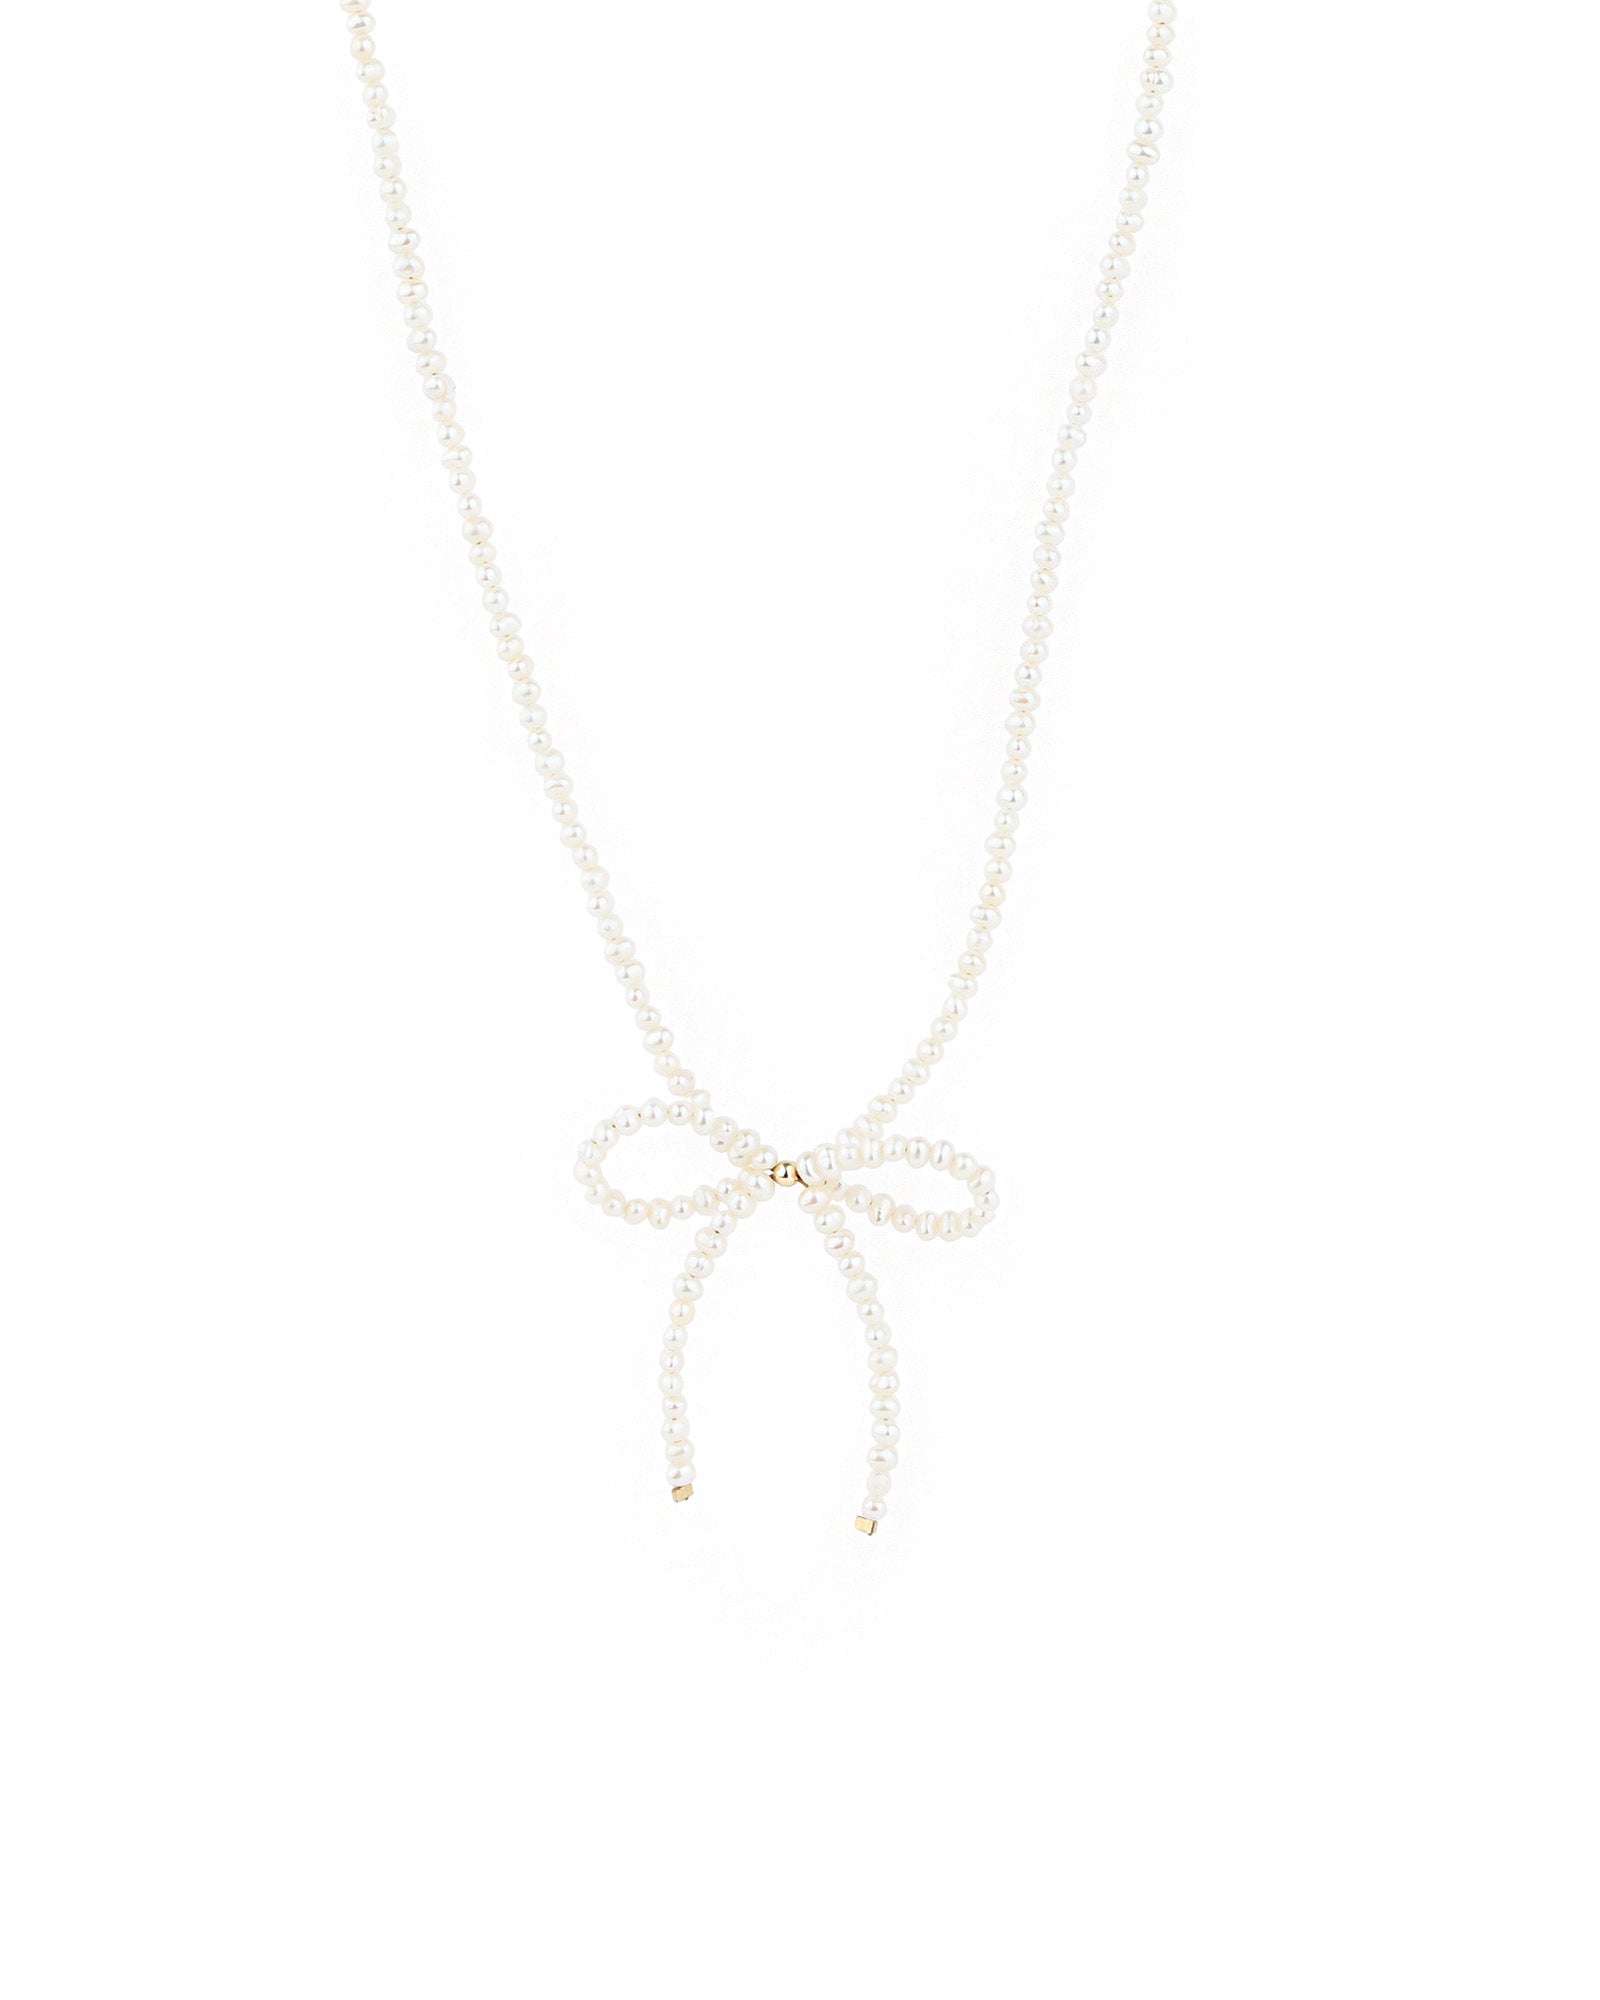 Poppy Rose Pearl Bow Necklace 14k Gold Filled, White Pearl | Blue